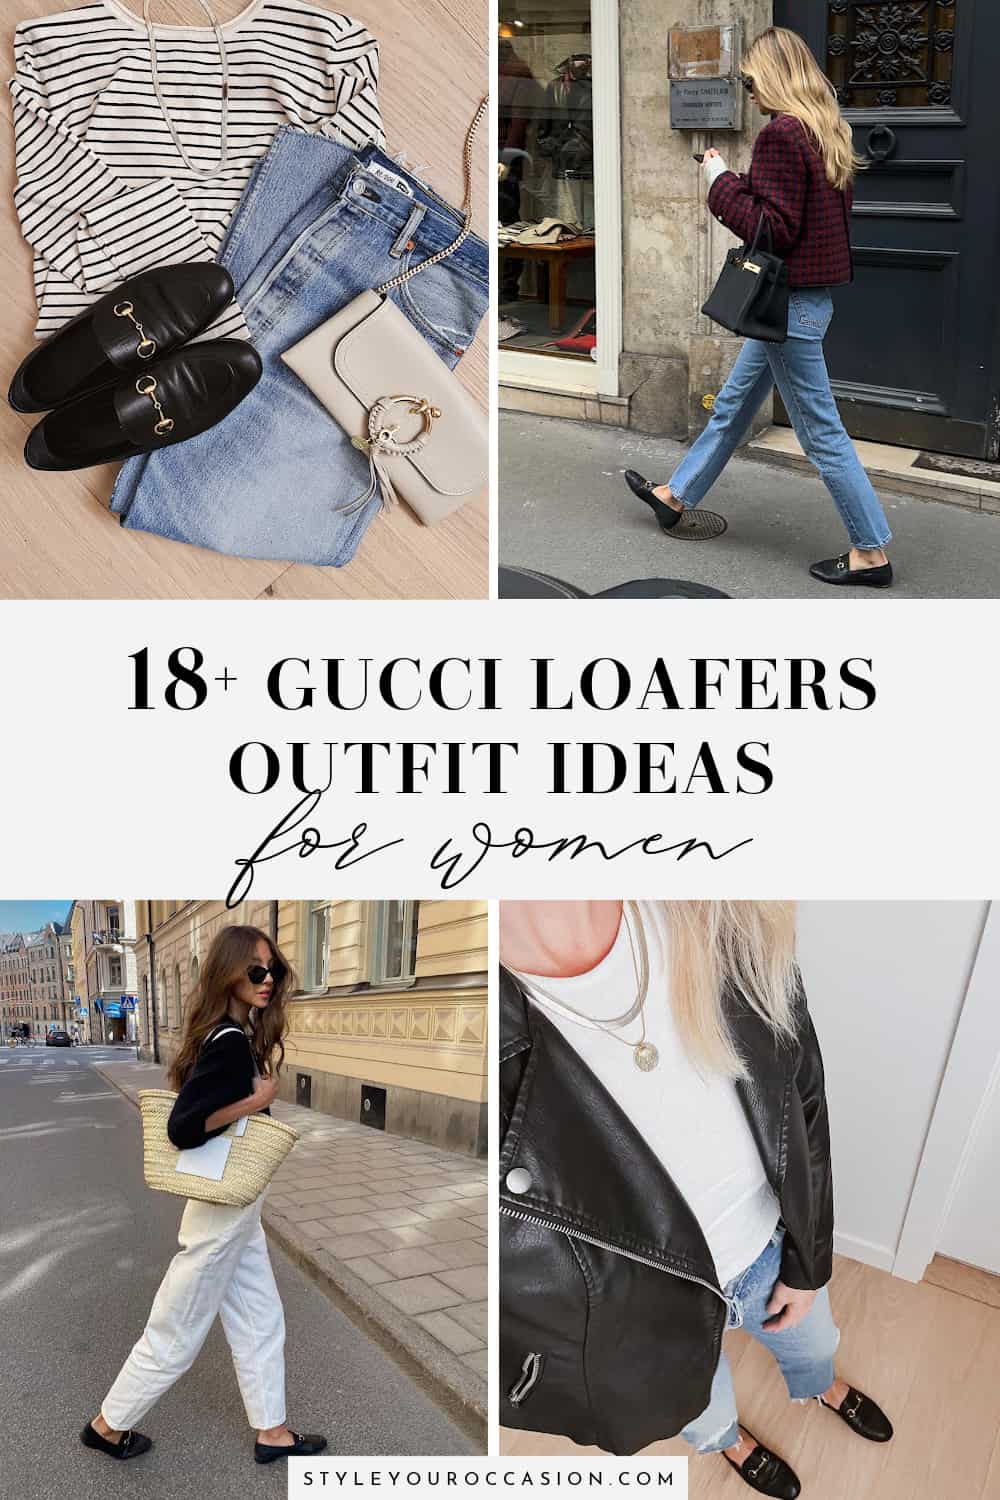 18+ Modern Womens Gucci Loafers Outfit Ideas (casual or dressy!)